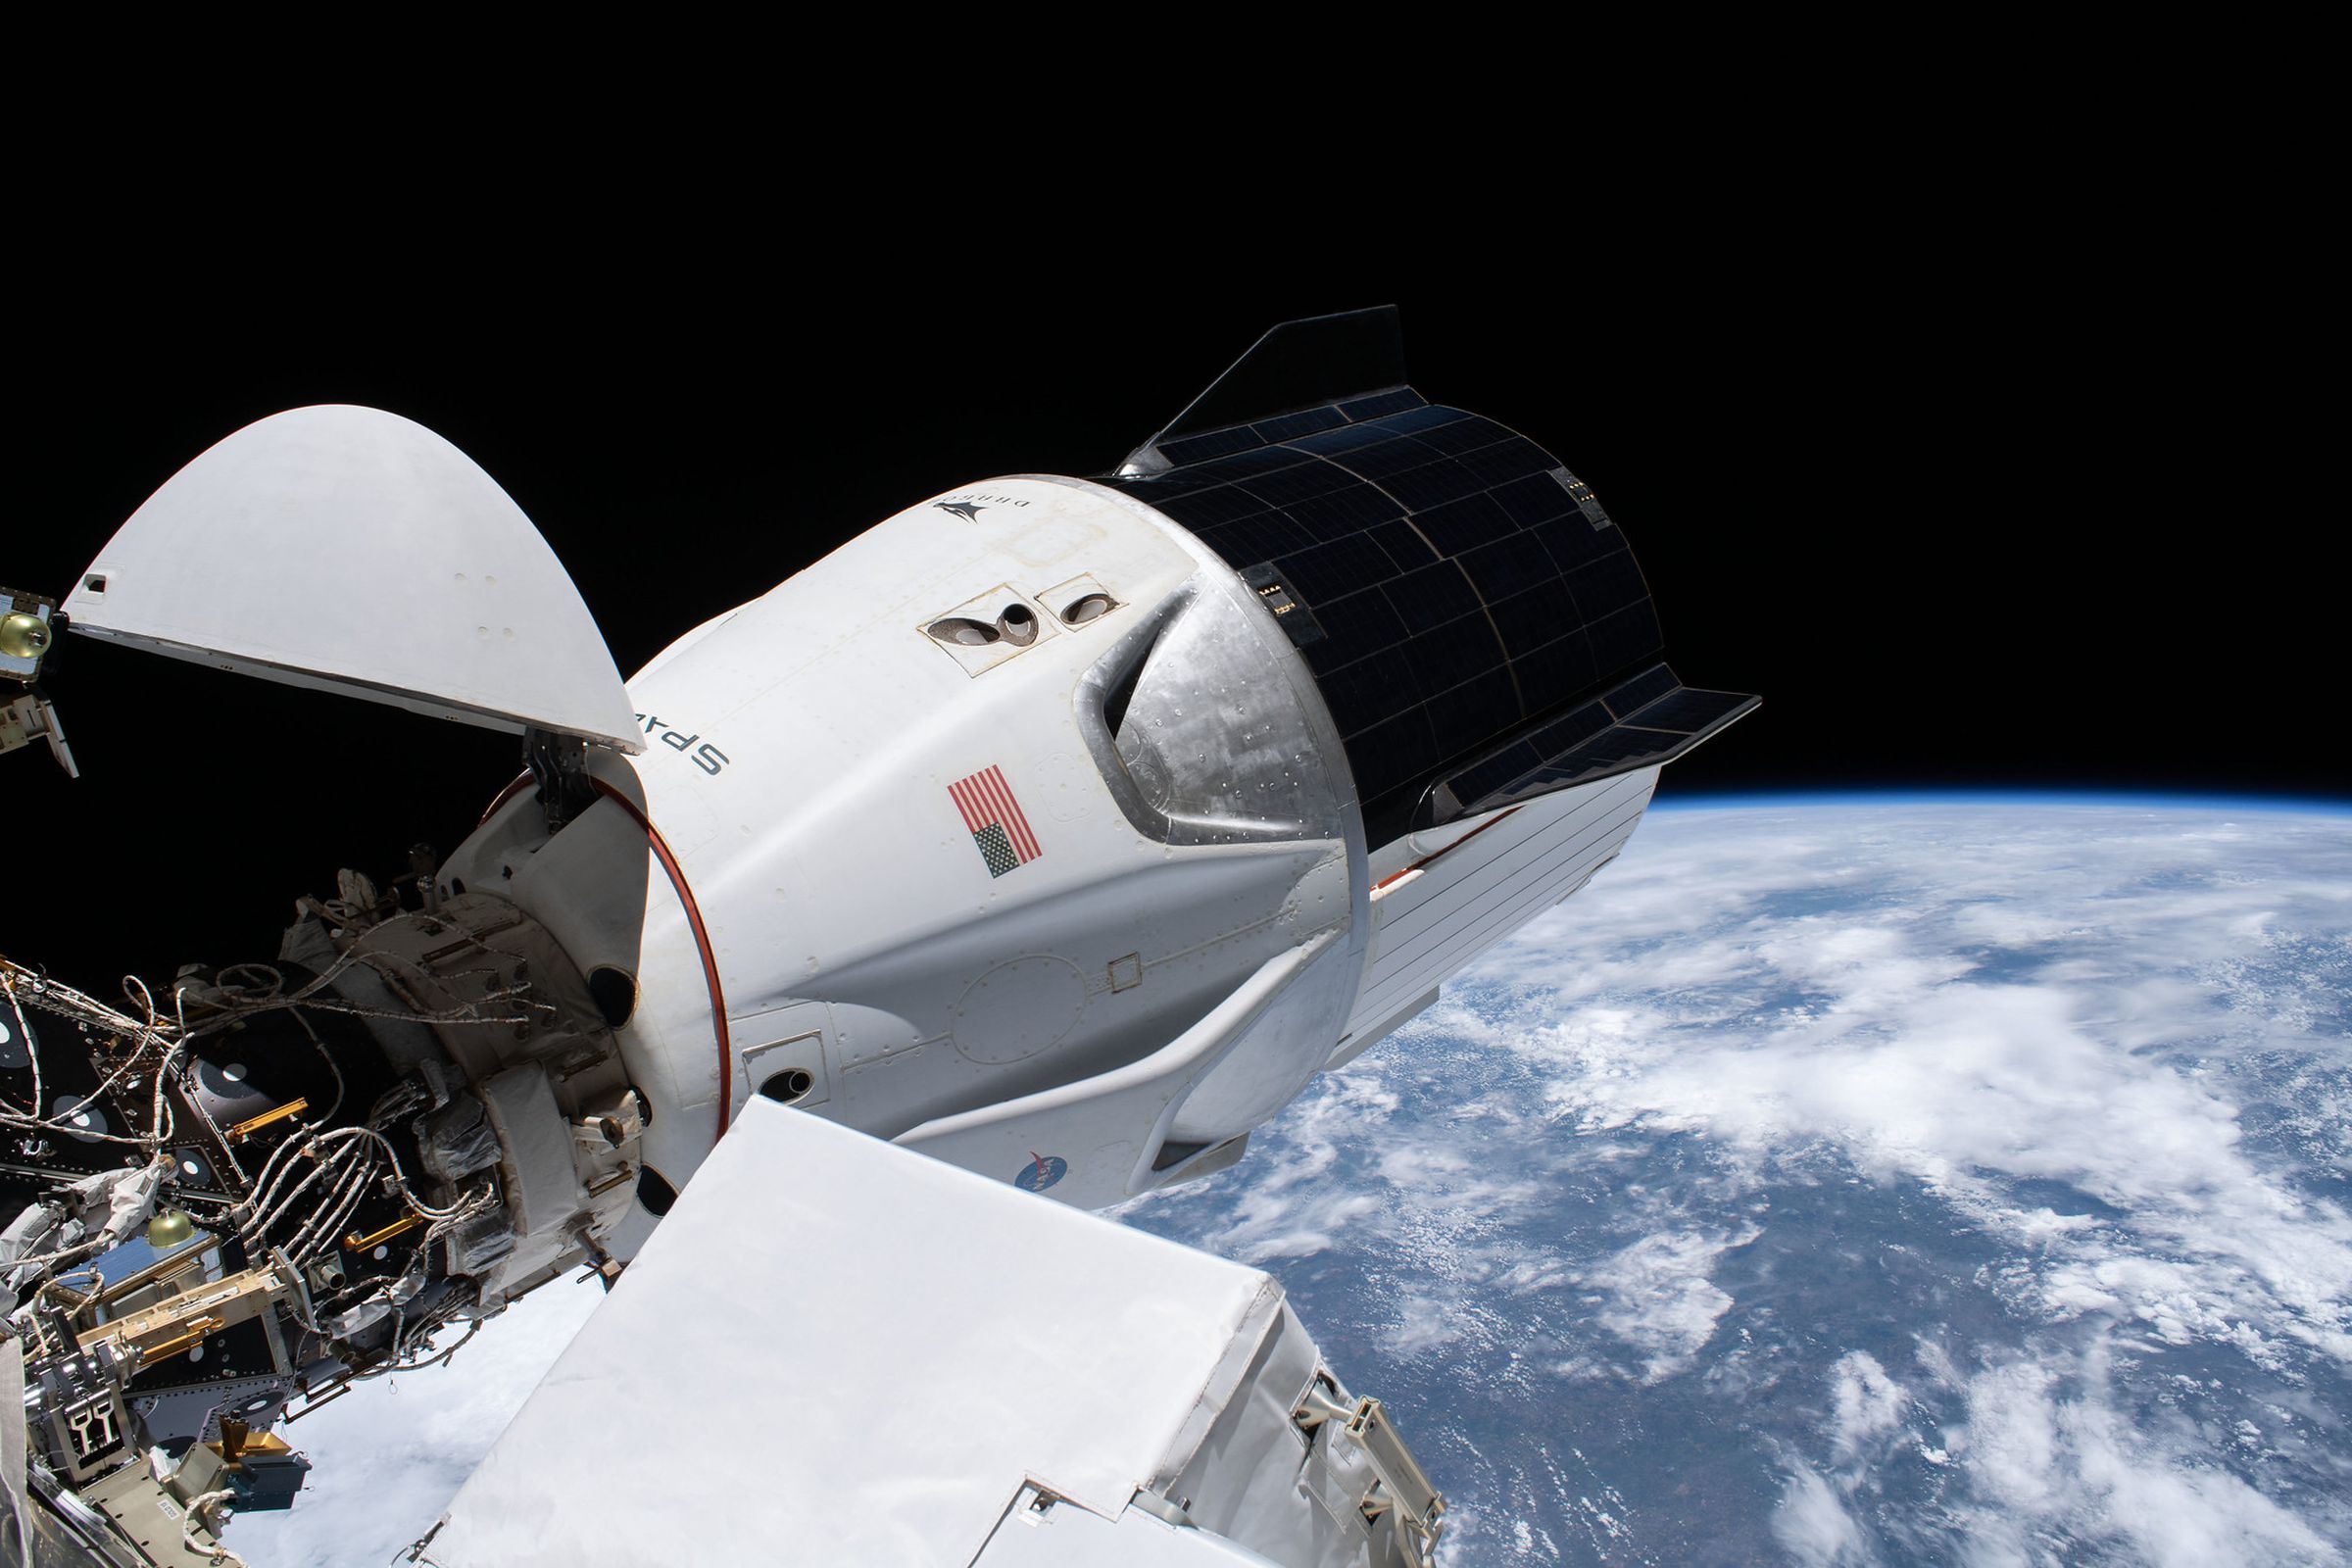 SpaceX’s Crew Dragon “Resilience” spacecraft is seen docked to the International Space Station’s Harmony module.